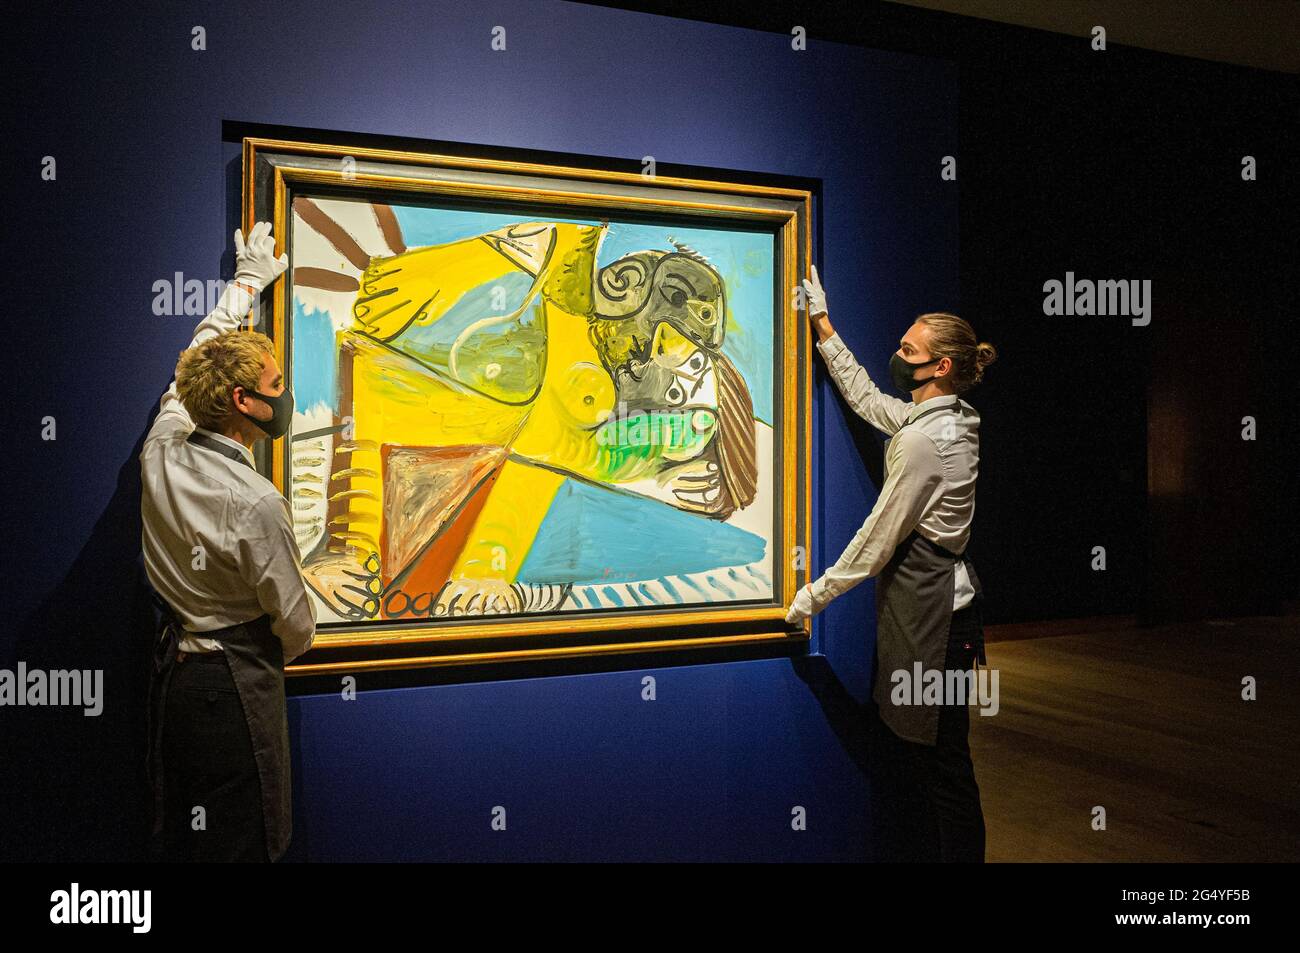 LONDON 24 June 2021. PABLO PICASSO (1881-1973) L'Étreinte oil on canvas. Painted in Mougins on 23 October 1969 Estimate GBP 11,000,000 - GBP 16,000,000. The sale takes place on 30 June.  IMAGES ARE ASKED TO BE UNDER EMBARGO UNTIL 10:30 AM. Credit amer ghazzal/Alamy Live News Stock Photo